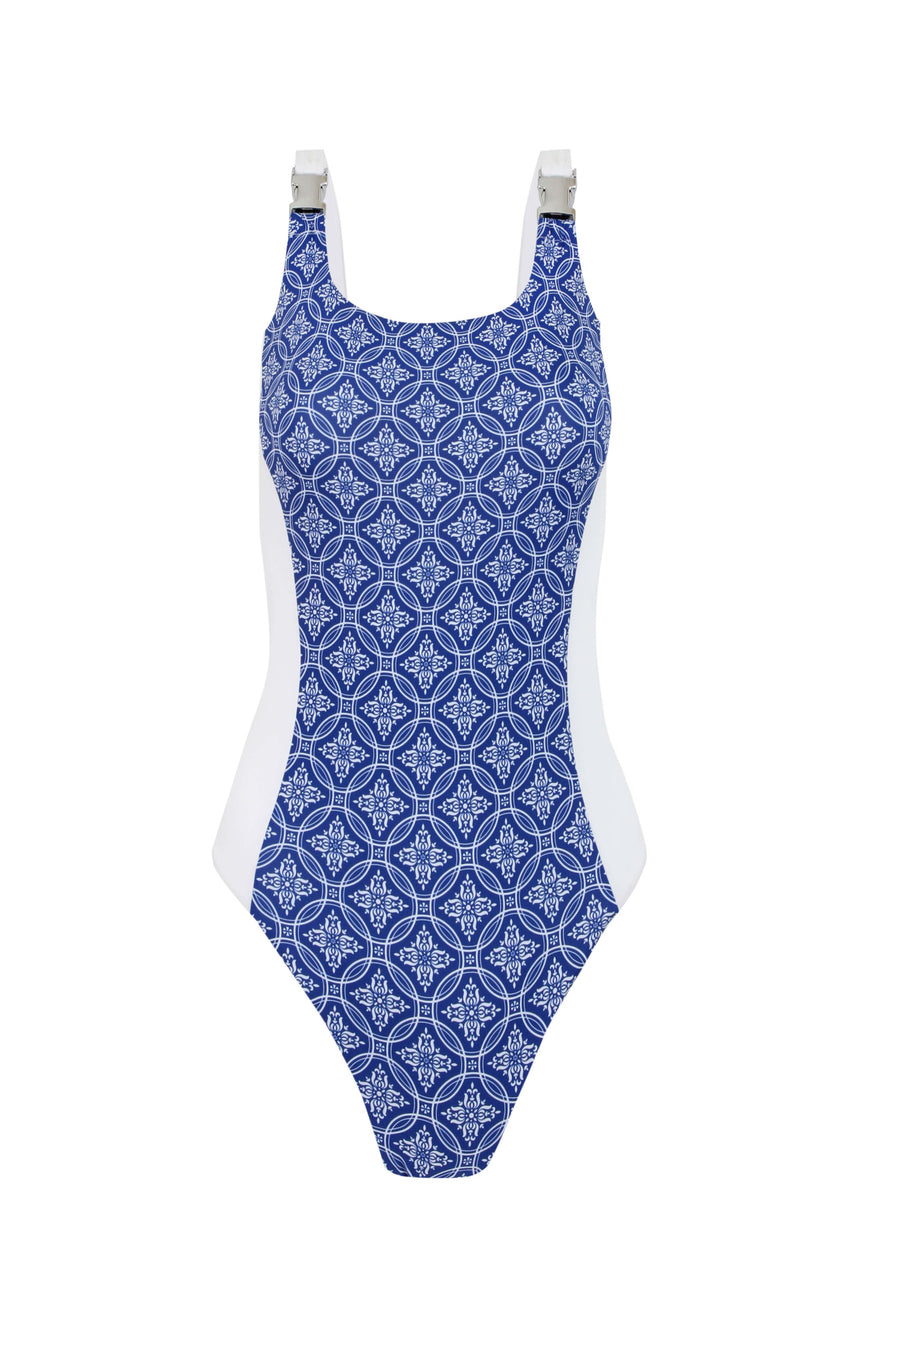 MAMA'S ONE PIECE - ROYAL/WHITE (REVERSIBLE)